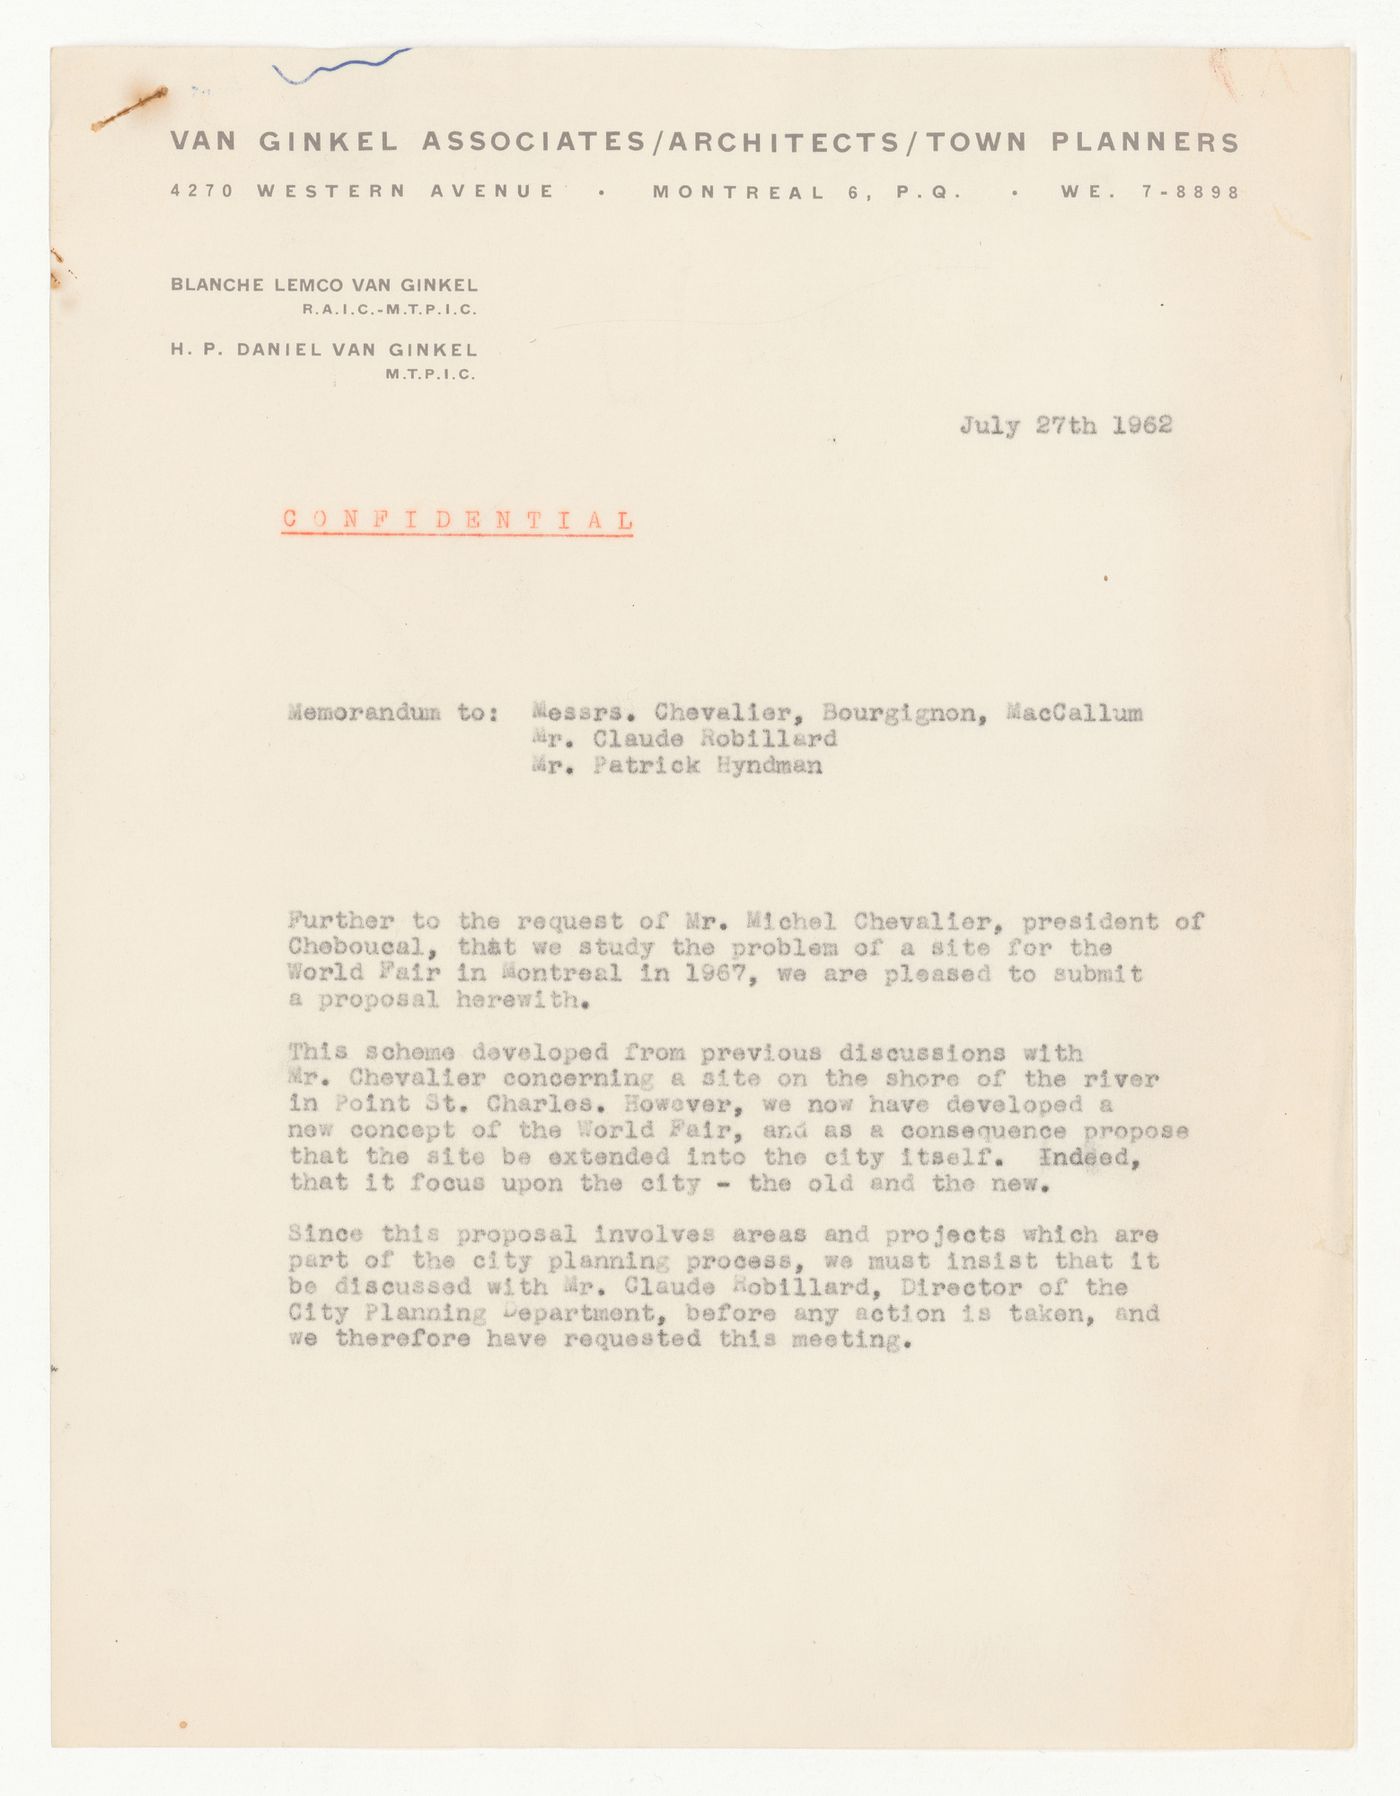 Letter from Van Ginkel Associates for Canadian World Exhibition, Expo '67, Montreal